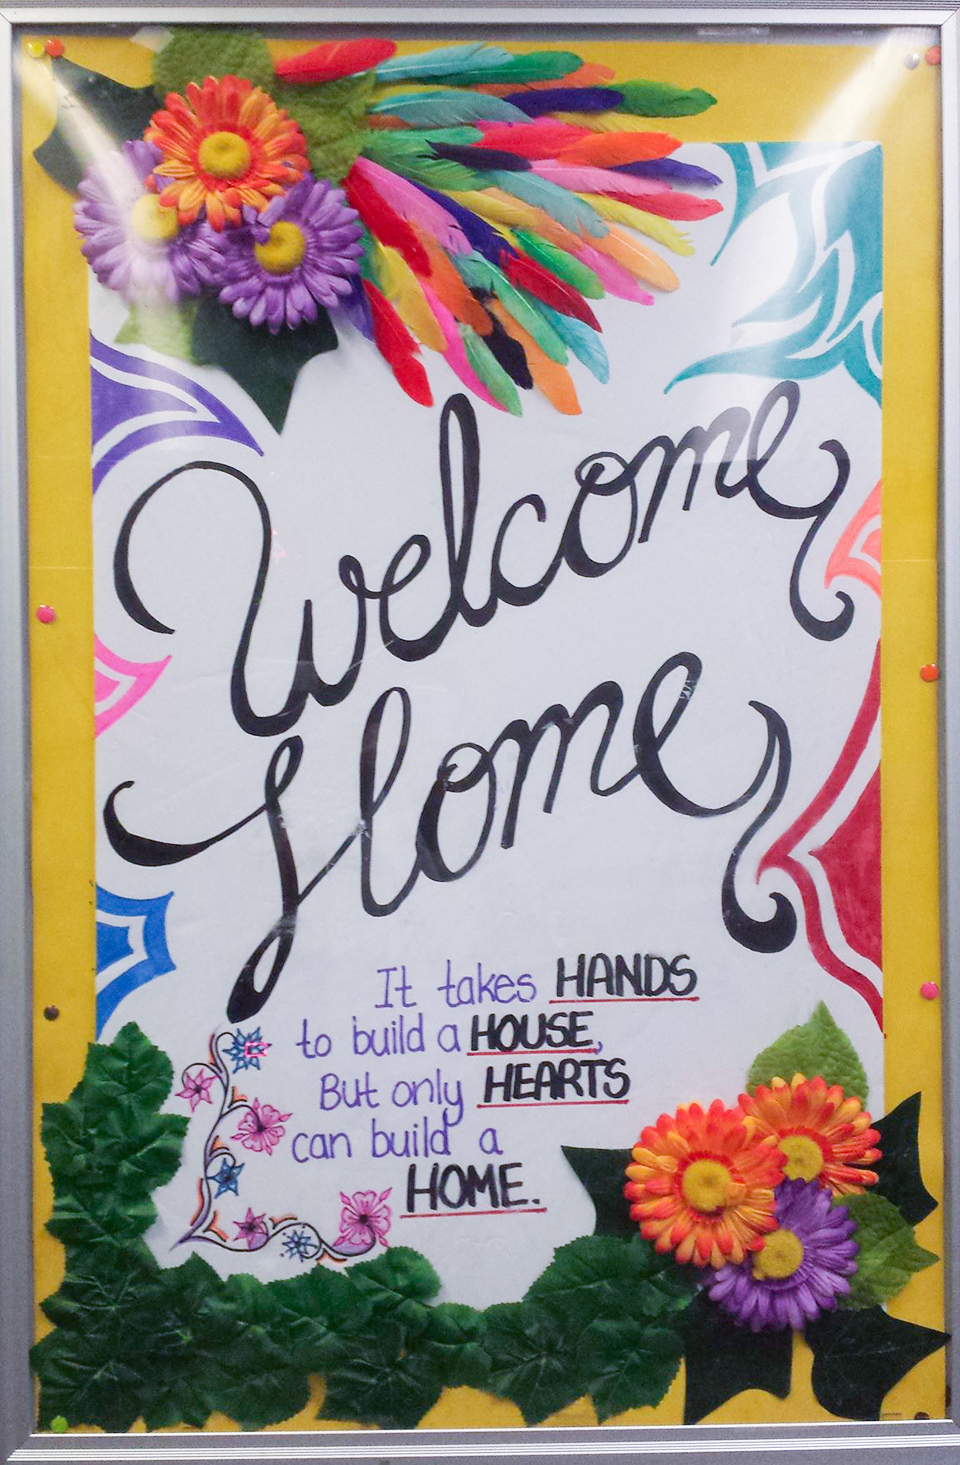 International House Welcome Message